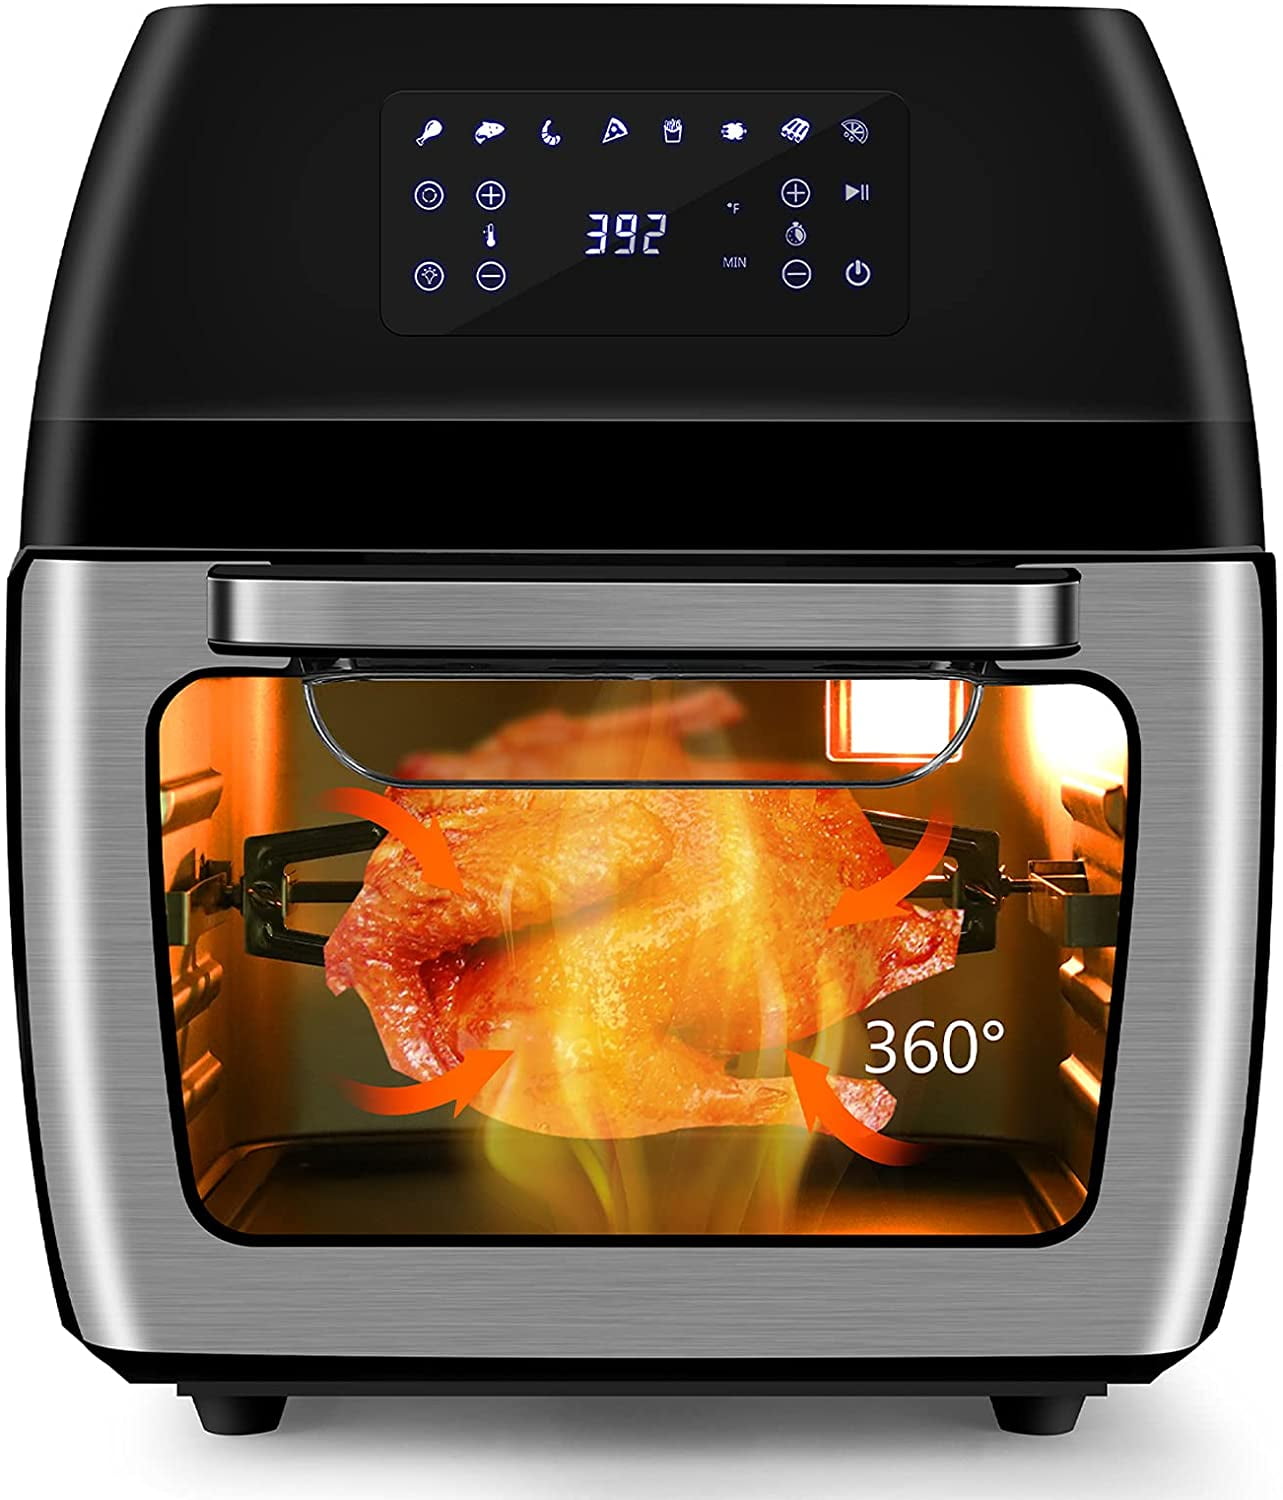 Air Fryer, 12 L (12.7 qt) Air fryer Oven with Rotisserie Function, 10 in 1  Electric Hot Oven with 8 Cooking Accessories and Recipe, 1700W Air Fryer